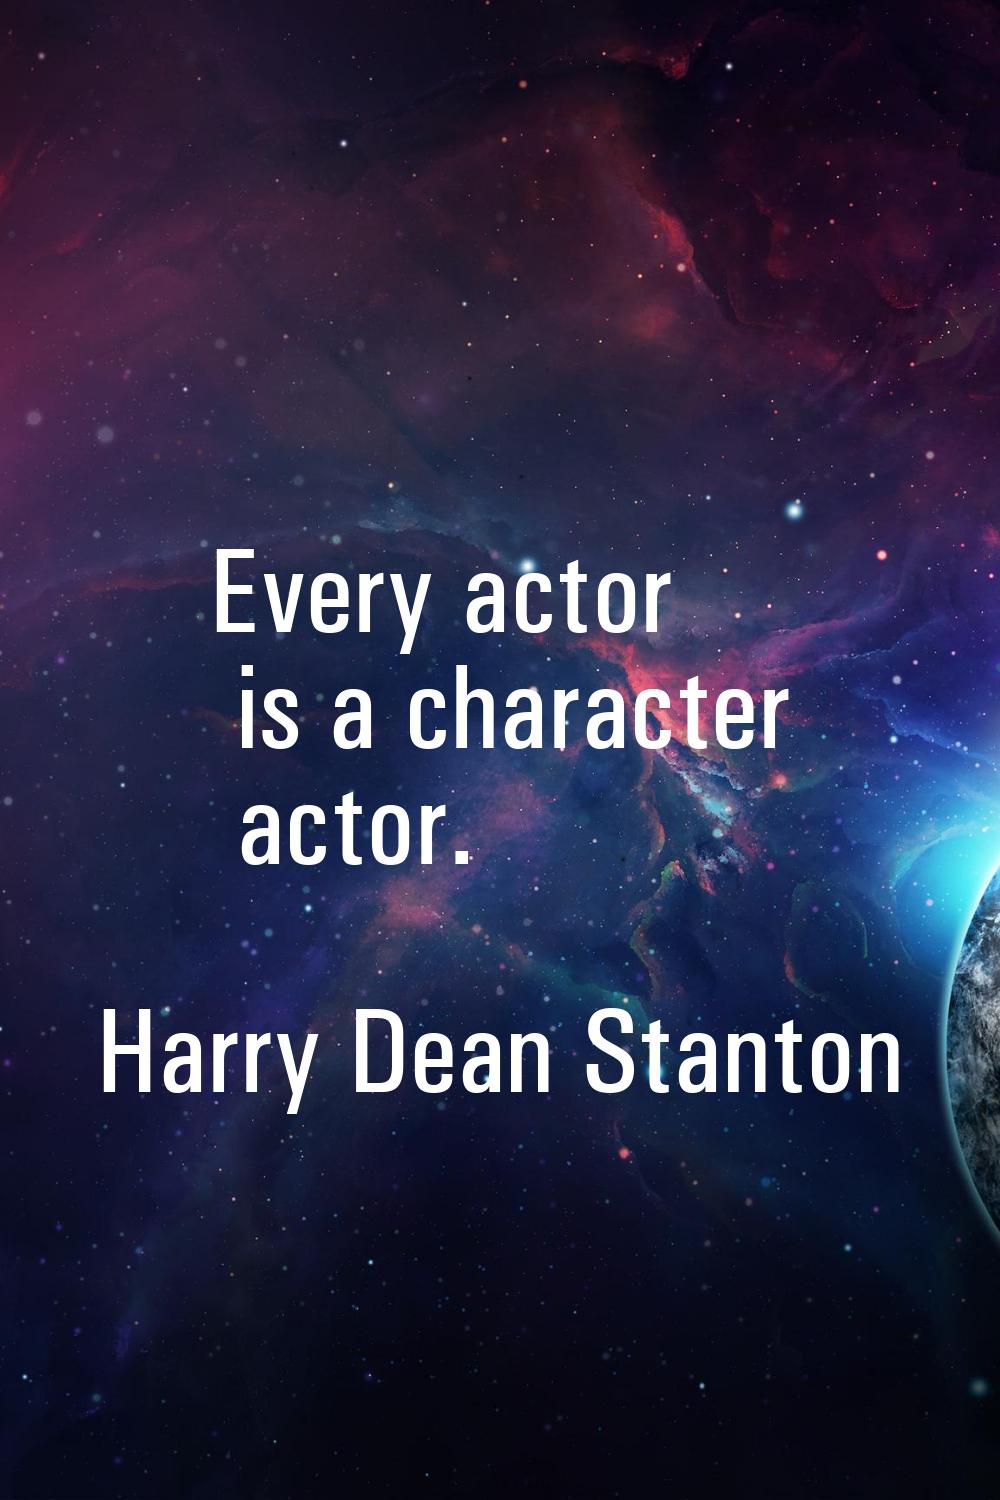 Every actor is a character actor.